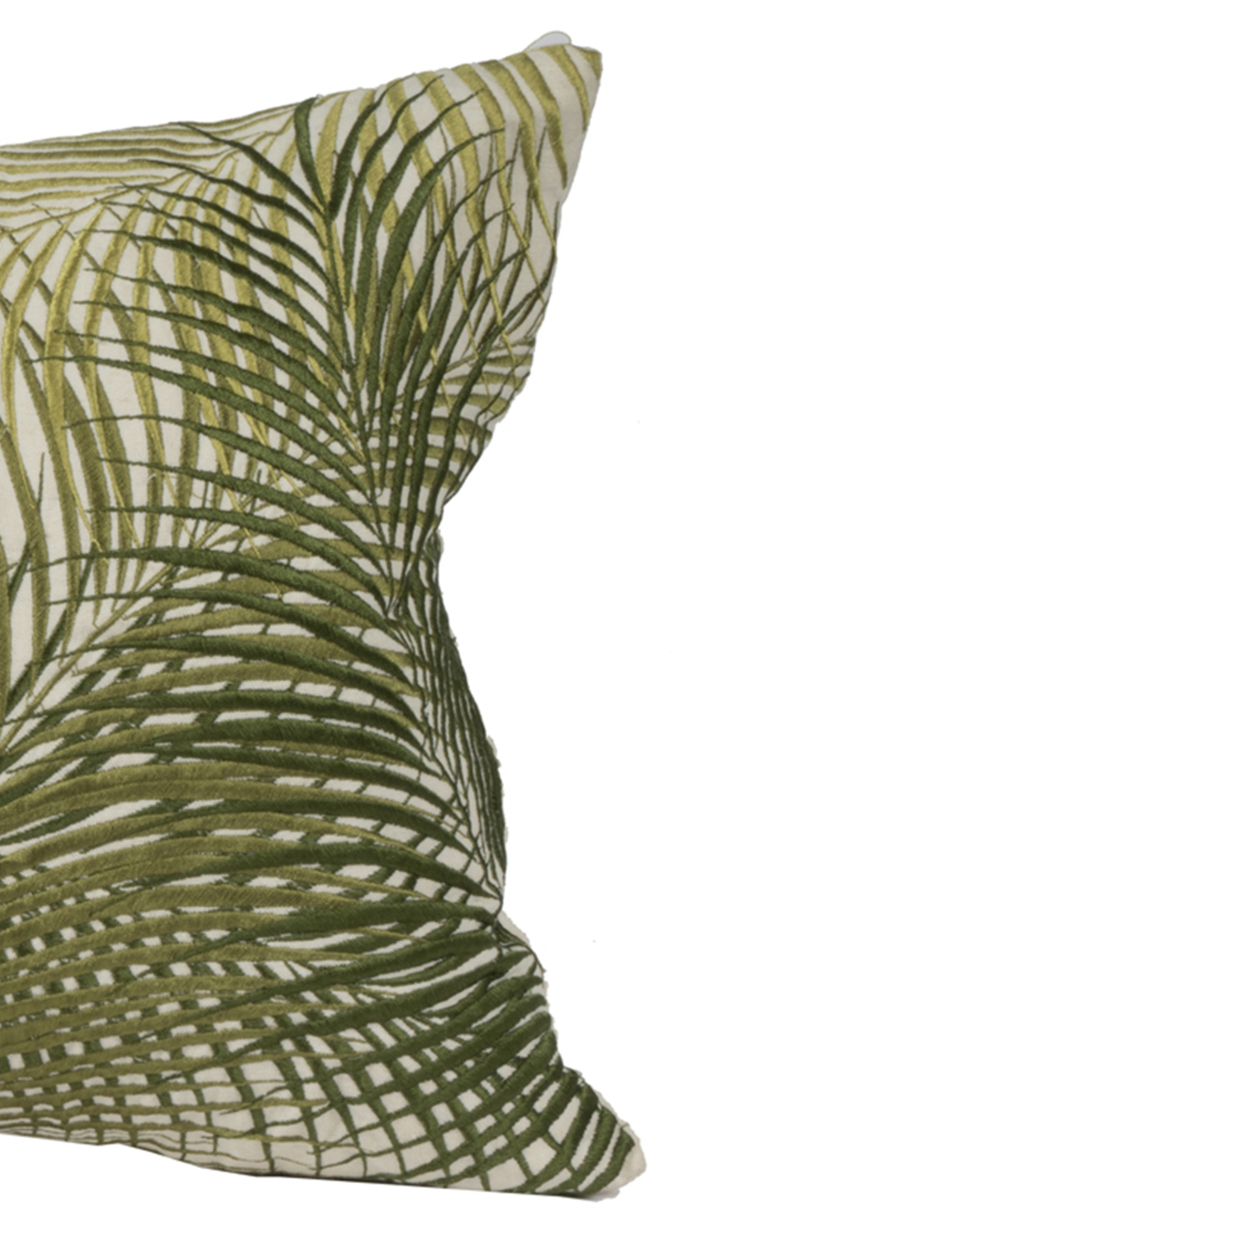 20 X 14 Inch Embroidered Pillow With Palm Leaf Design, White And Green- Saltoro Sherpi